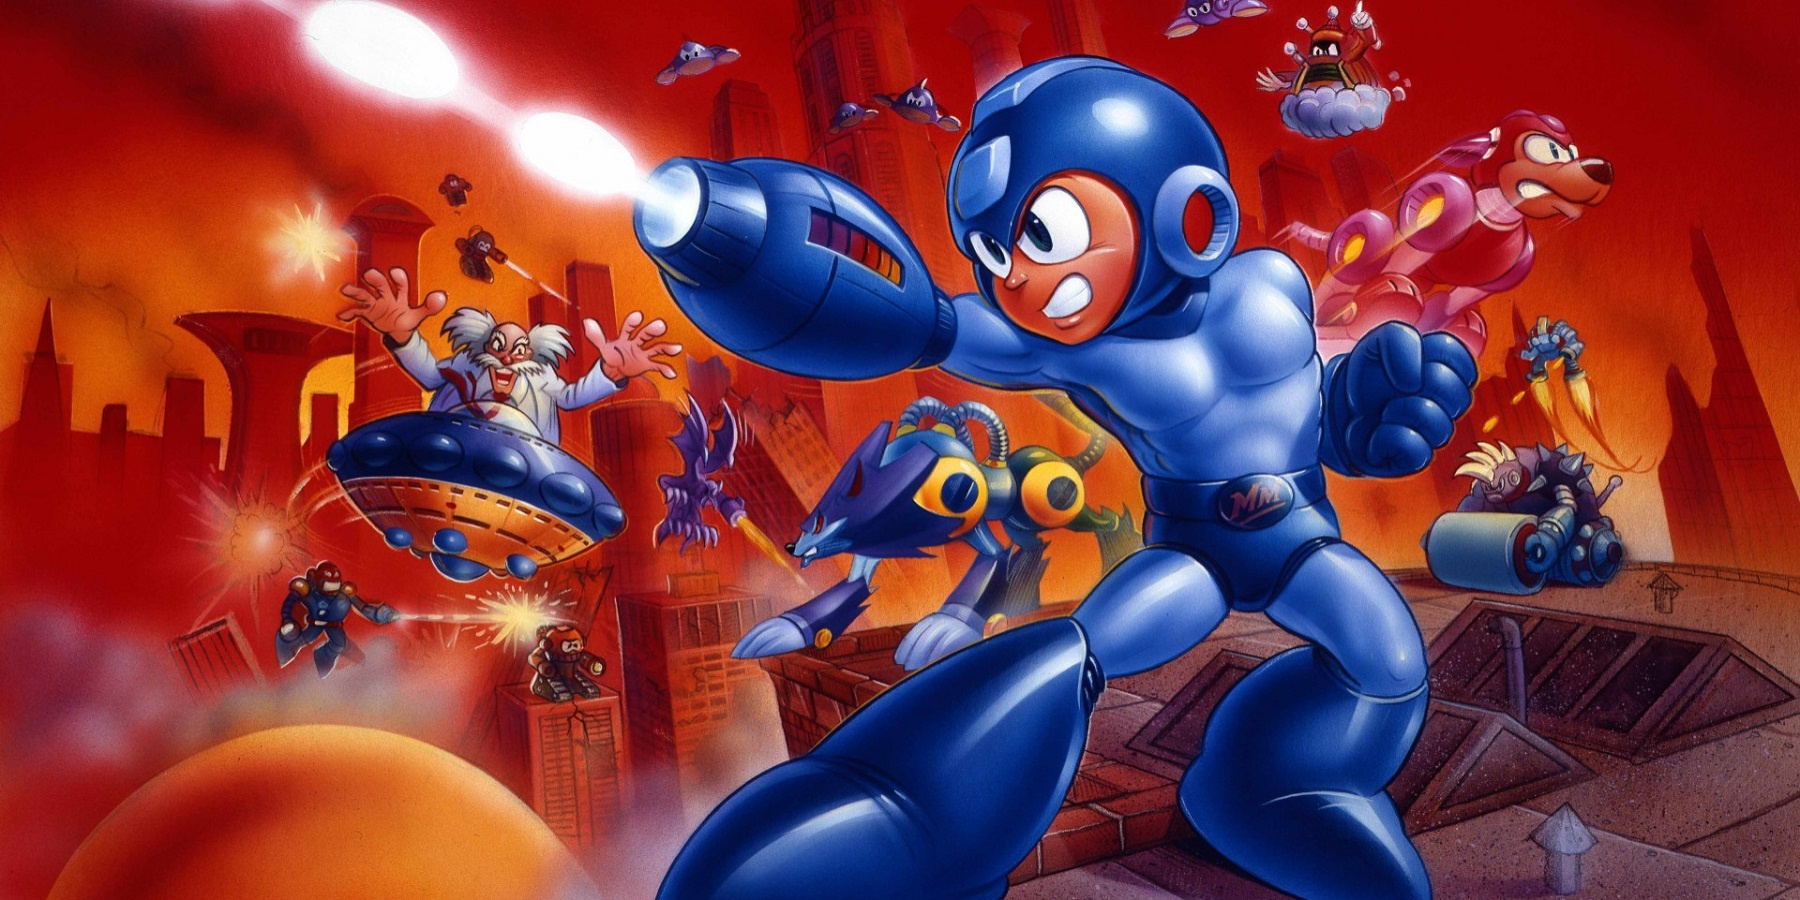 Is there a Mega Man movie?